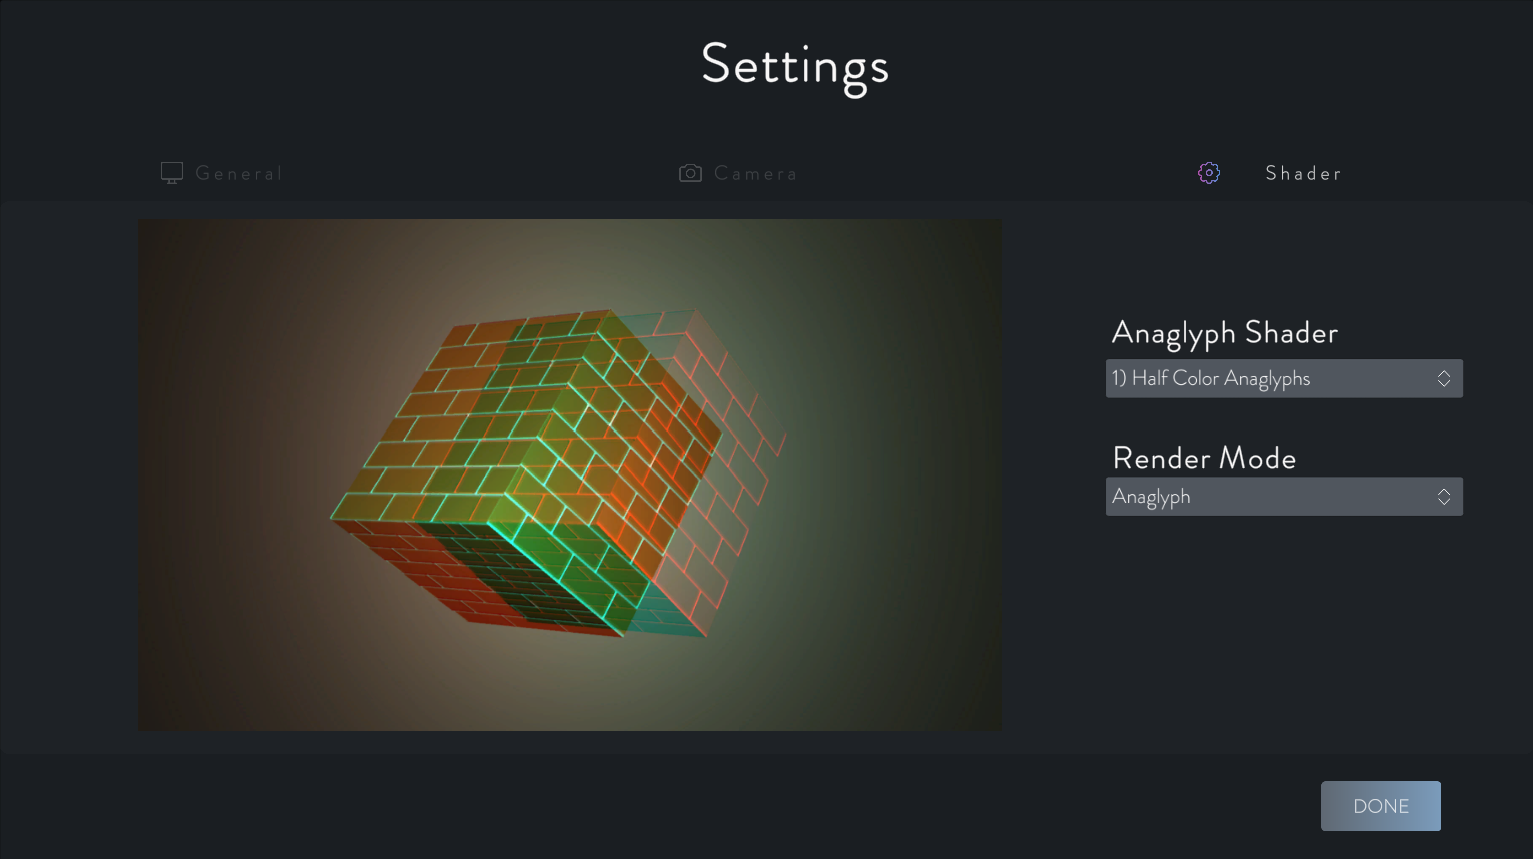 Configuring shader and render mode